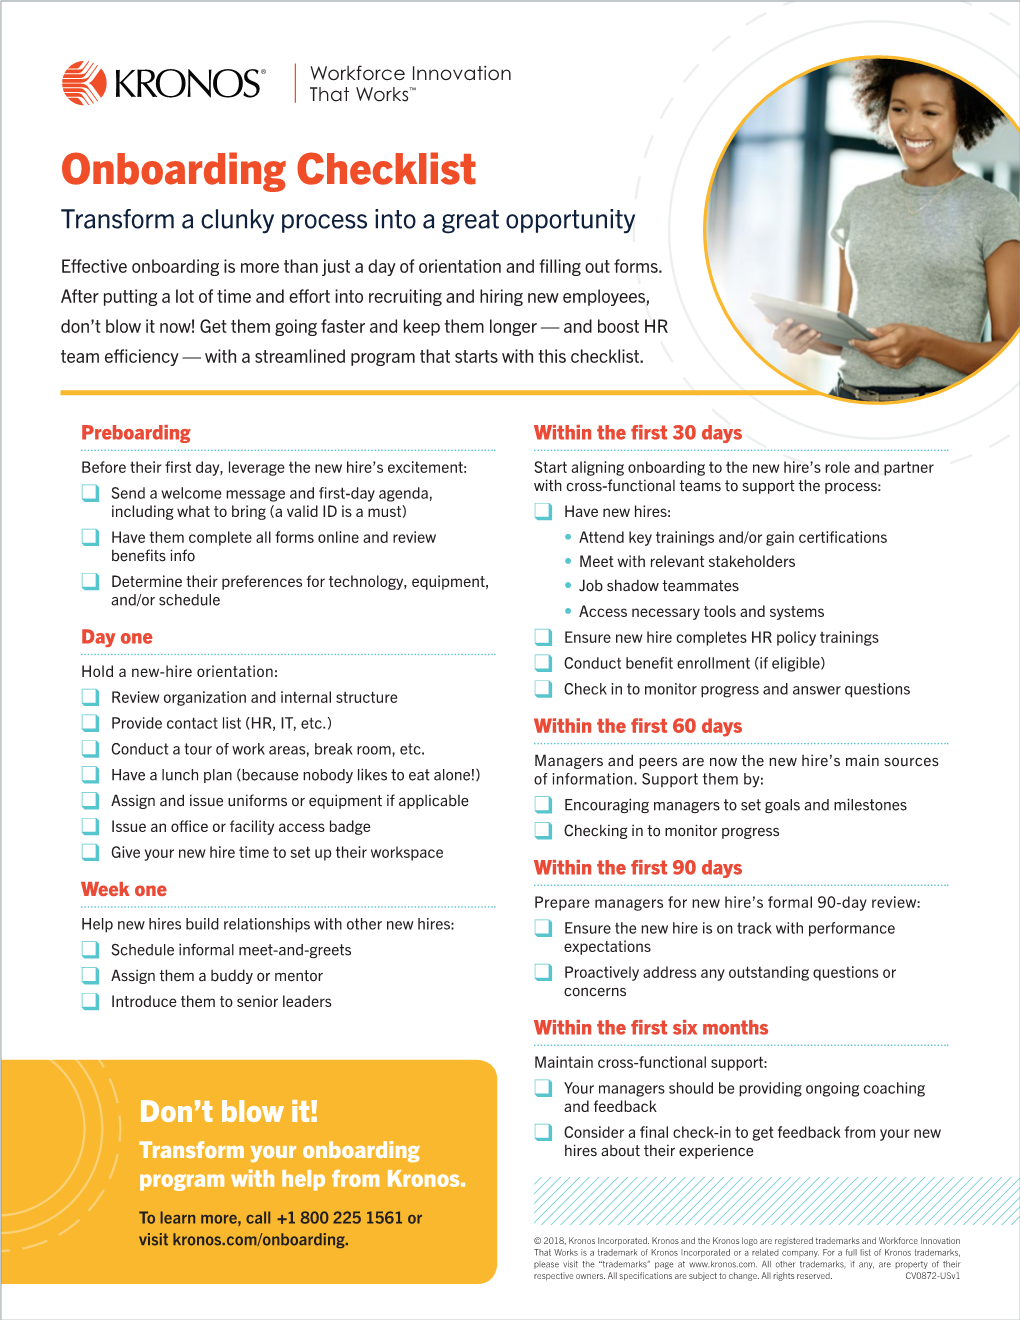 Onboarding Checklist Transform a Clunky Process Into a Great Opportunity